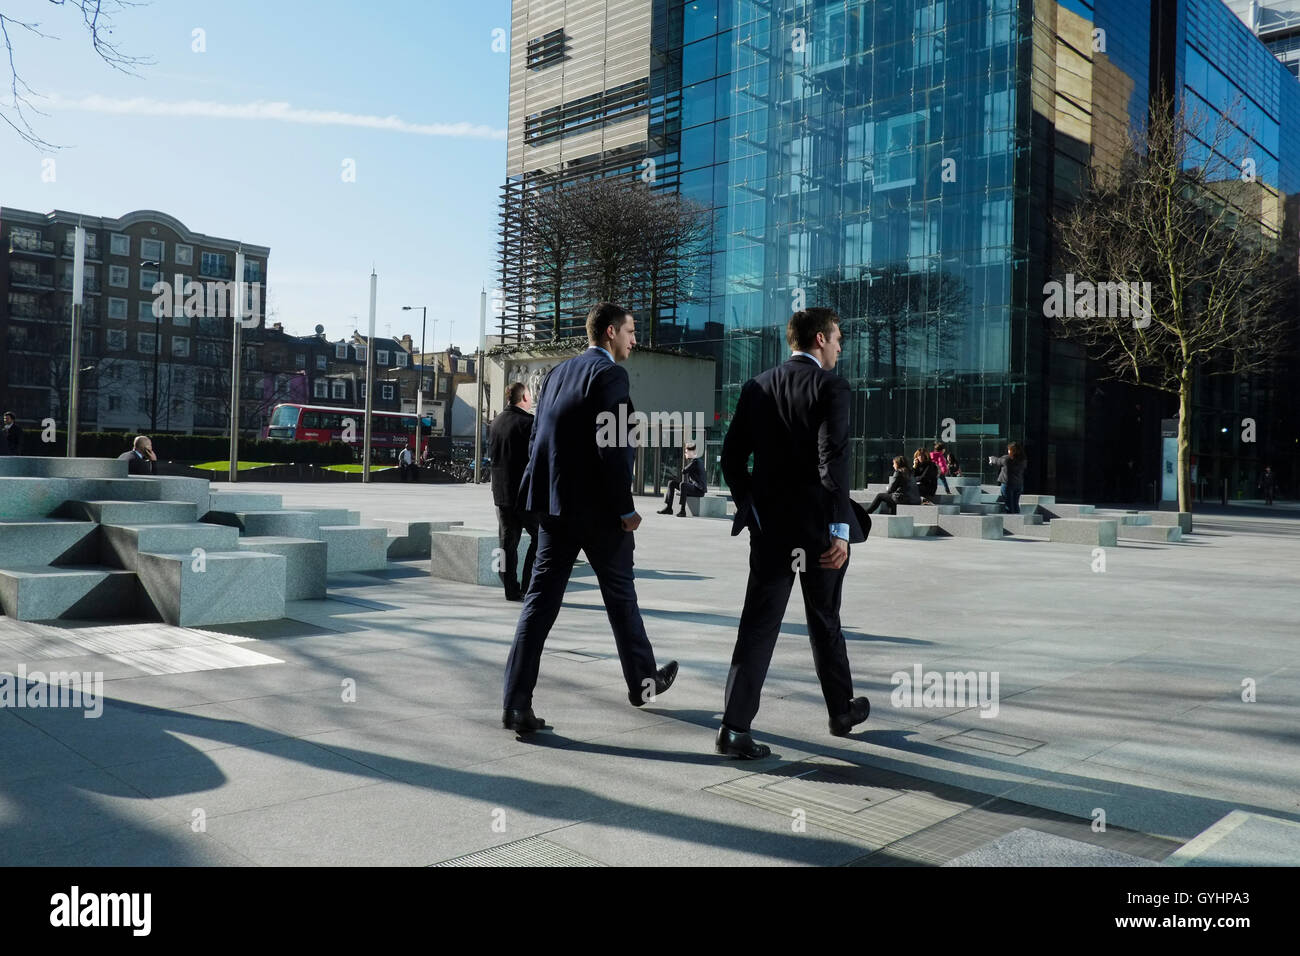 Two city workers walking through business district in London Stock Photo